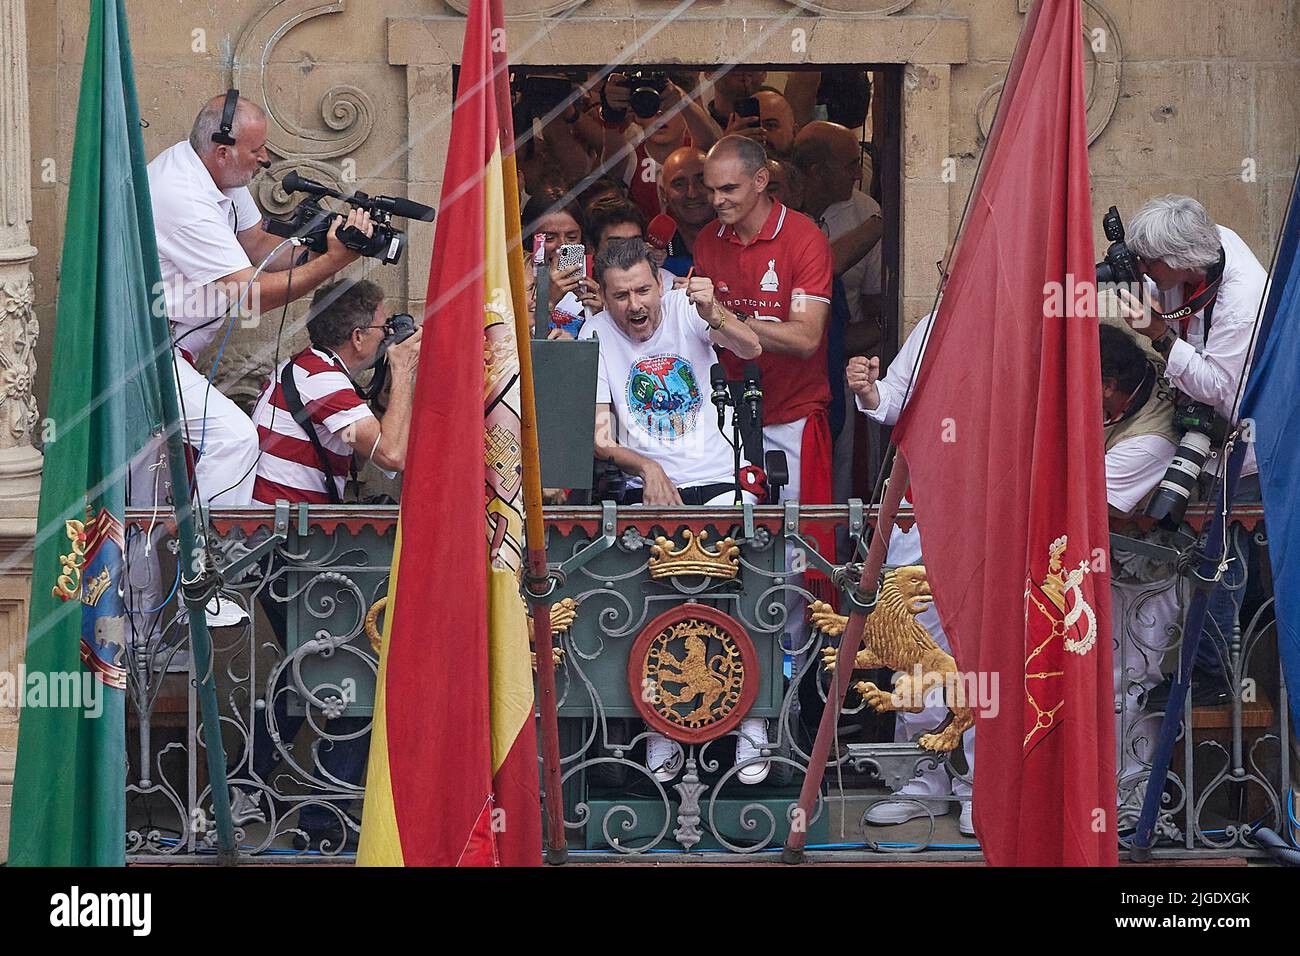 Former football player Juan Carlos Unzue during the opening day or 'Chupinazo' of the San Fermin Running of the Bulls fiesta on July 06, 2022 in Pamplona, Spain. The annual Fiesta de San Fermin, made famous by the 1926 novel of US writer Ernest Hemmingway entitled 'The Sun Also Rises', involves the daily running of the bulls through the historic heart of Pamplona to the bull ring. (Photo by Ruben Albarran / PRESSINPHOTO) Stock Photo